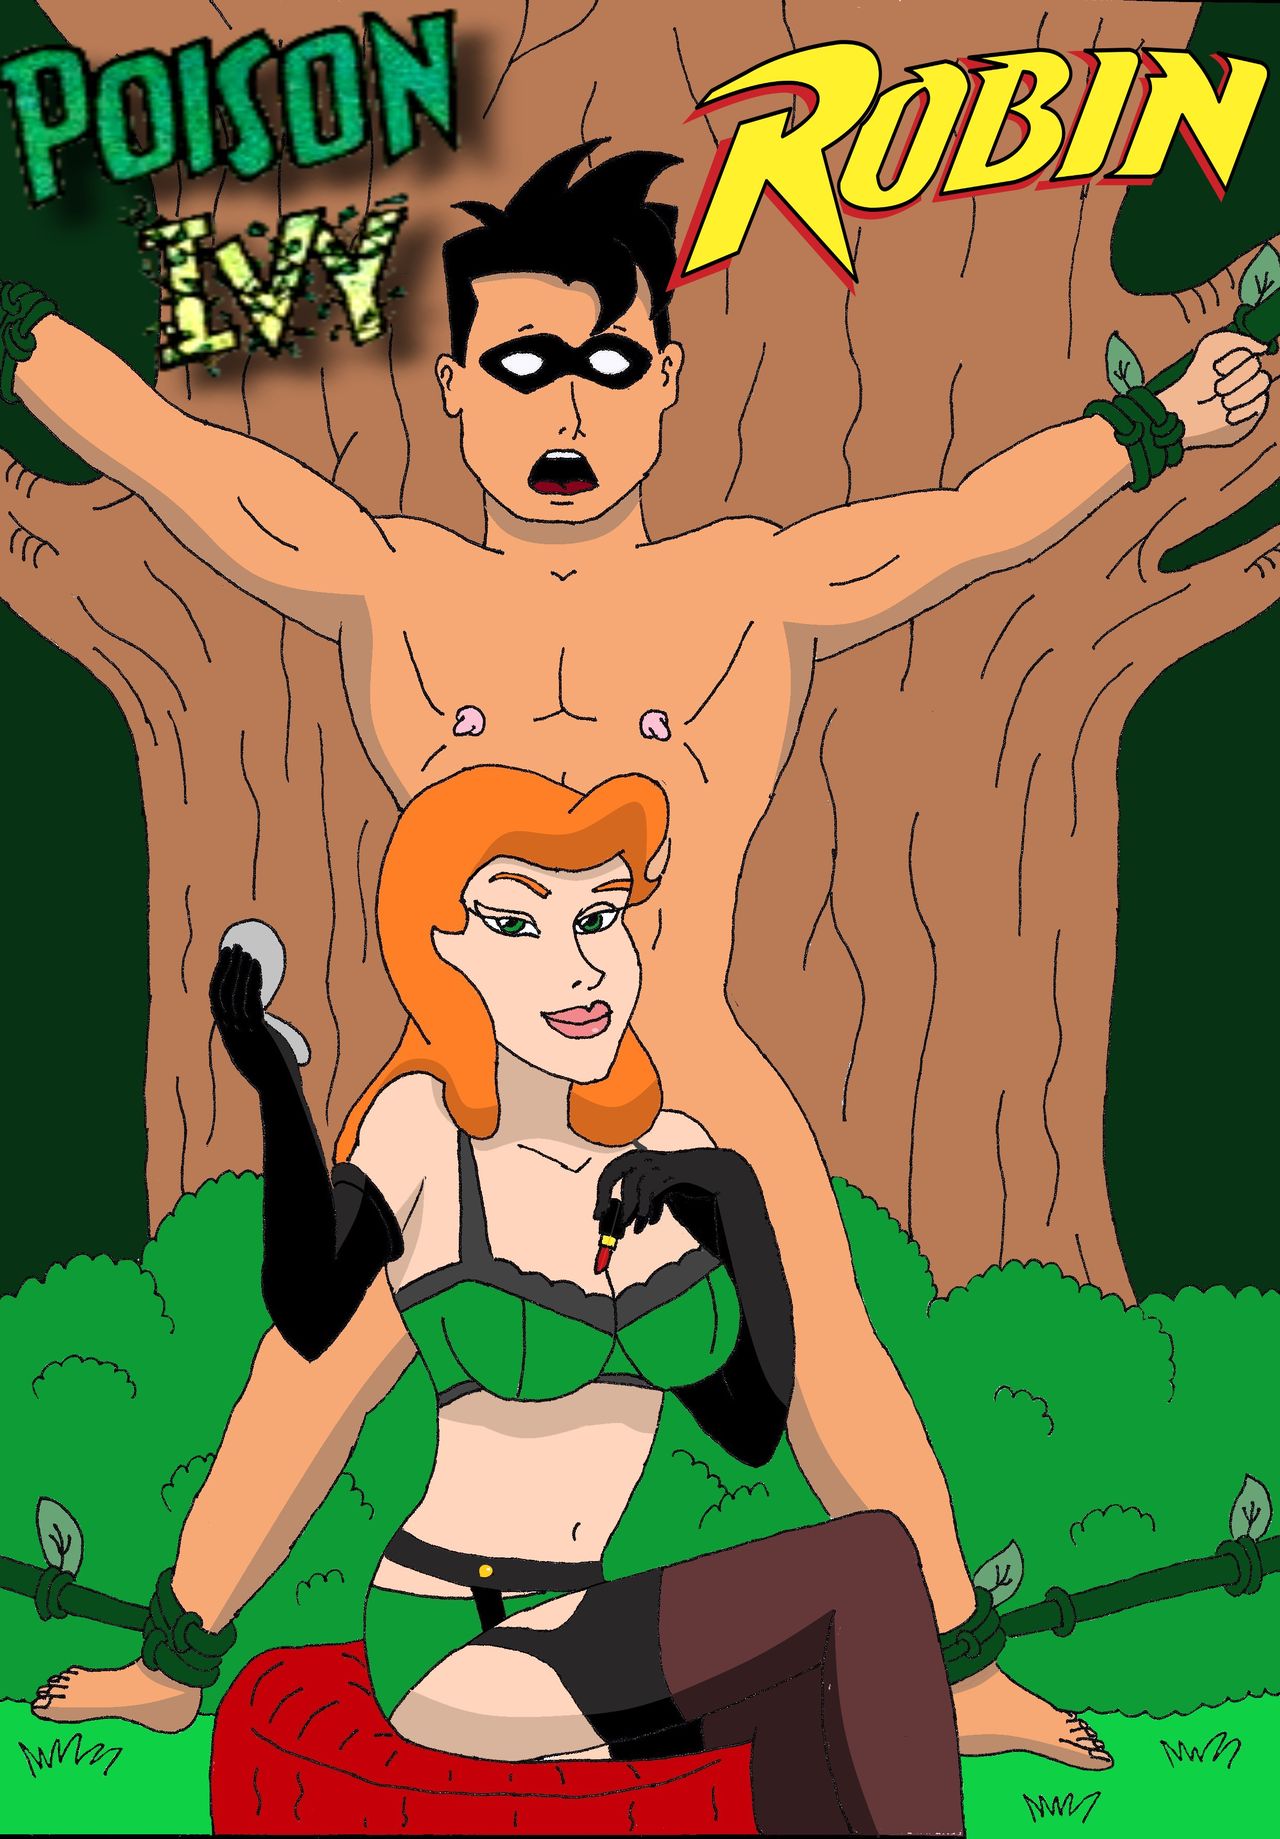 Poison ivy and robin porn